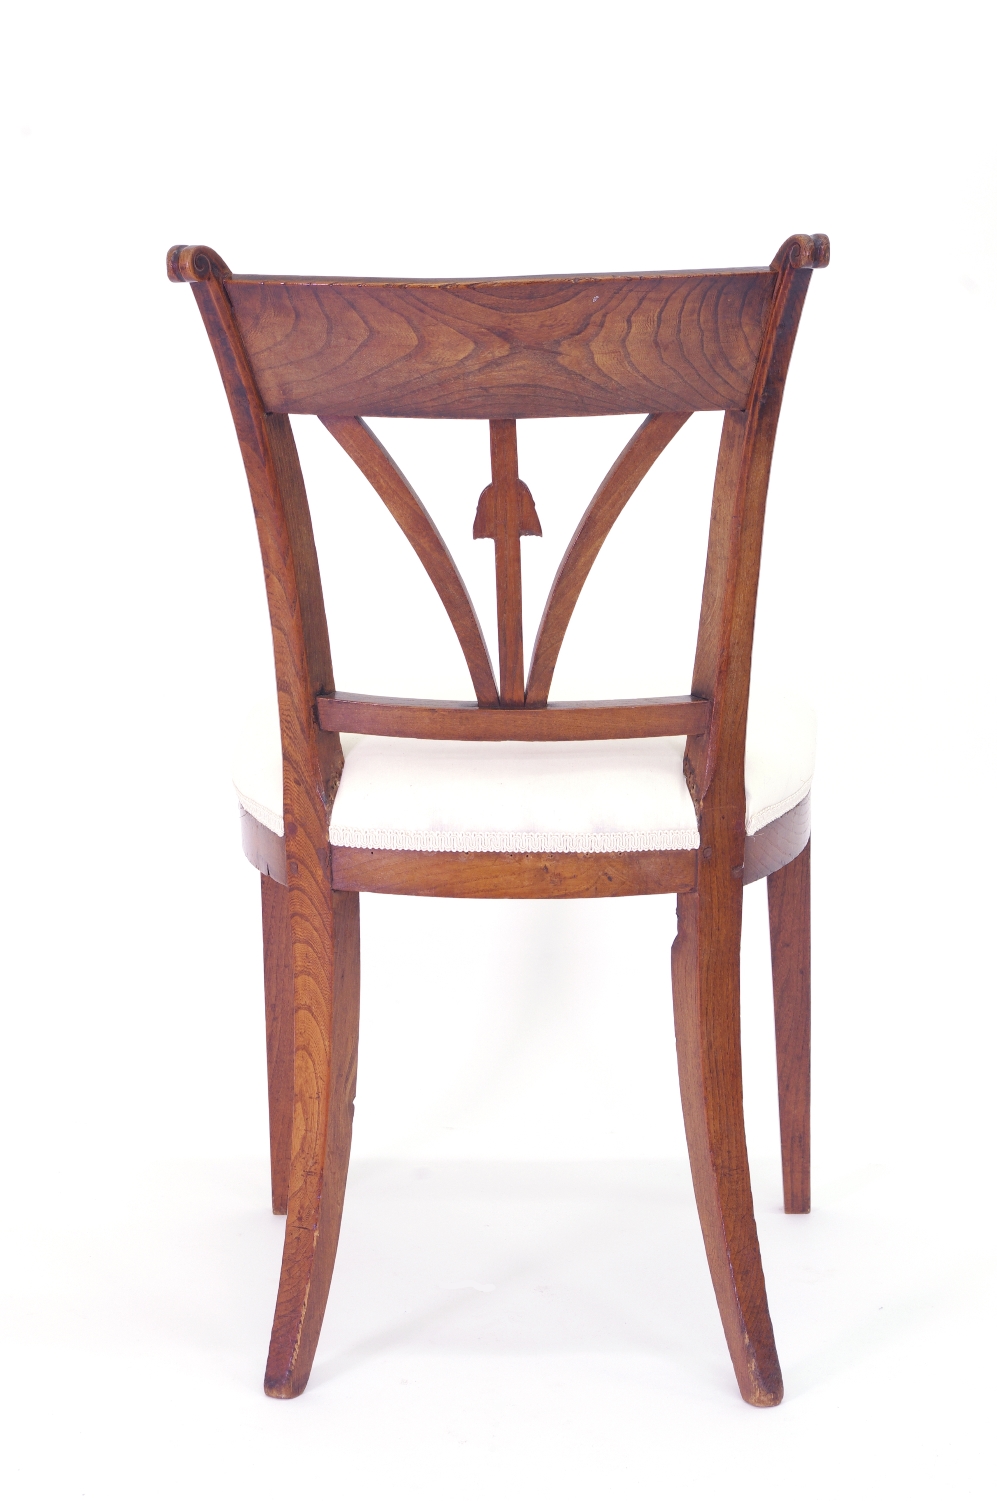 Set of Four Italian Side Chairs, c. 1800